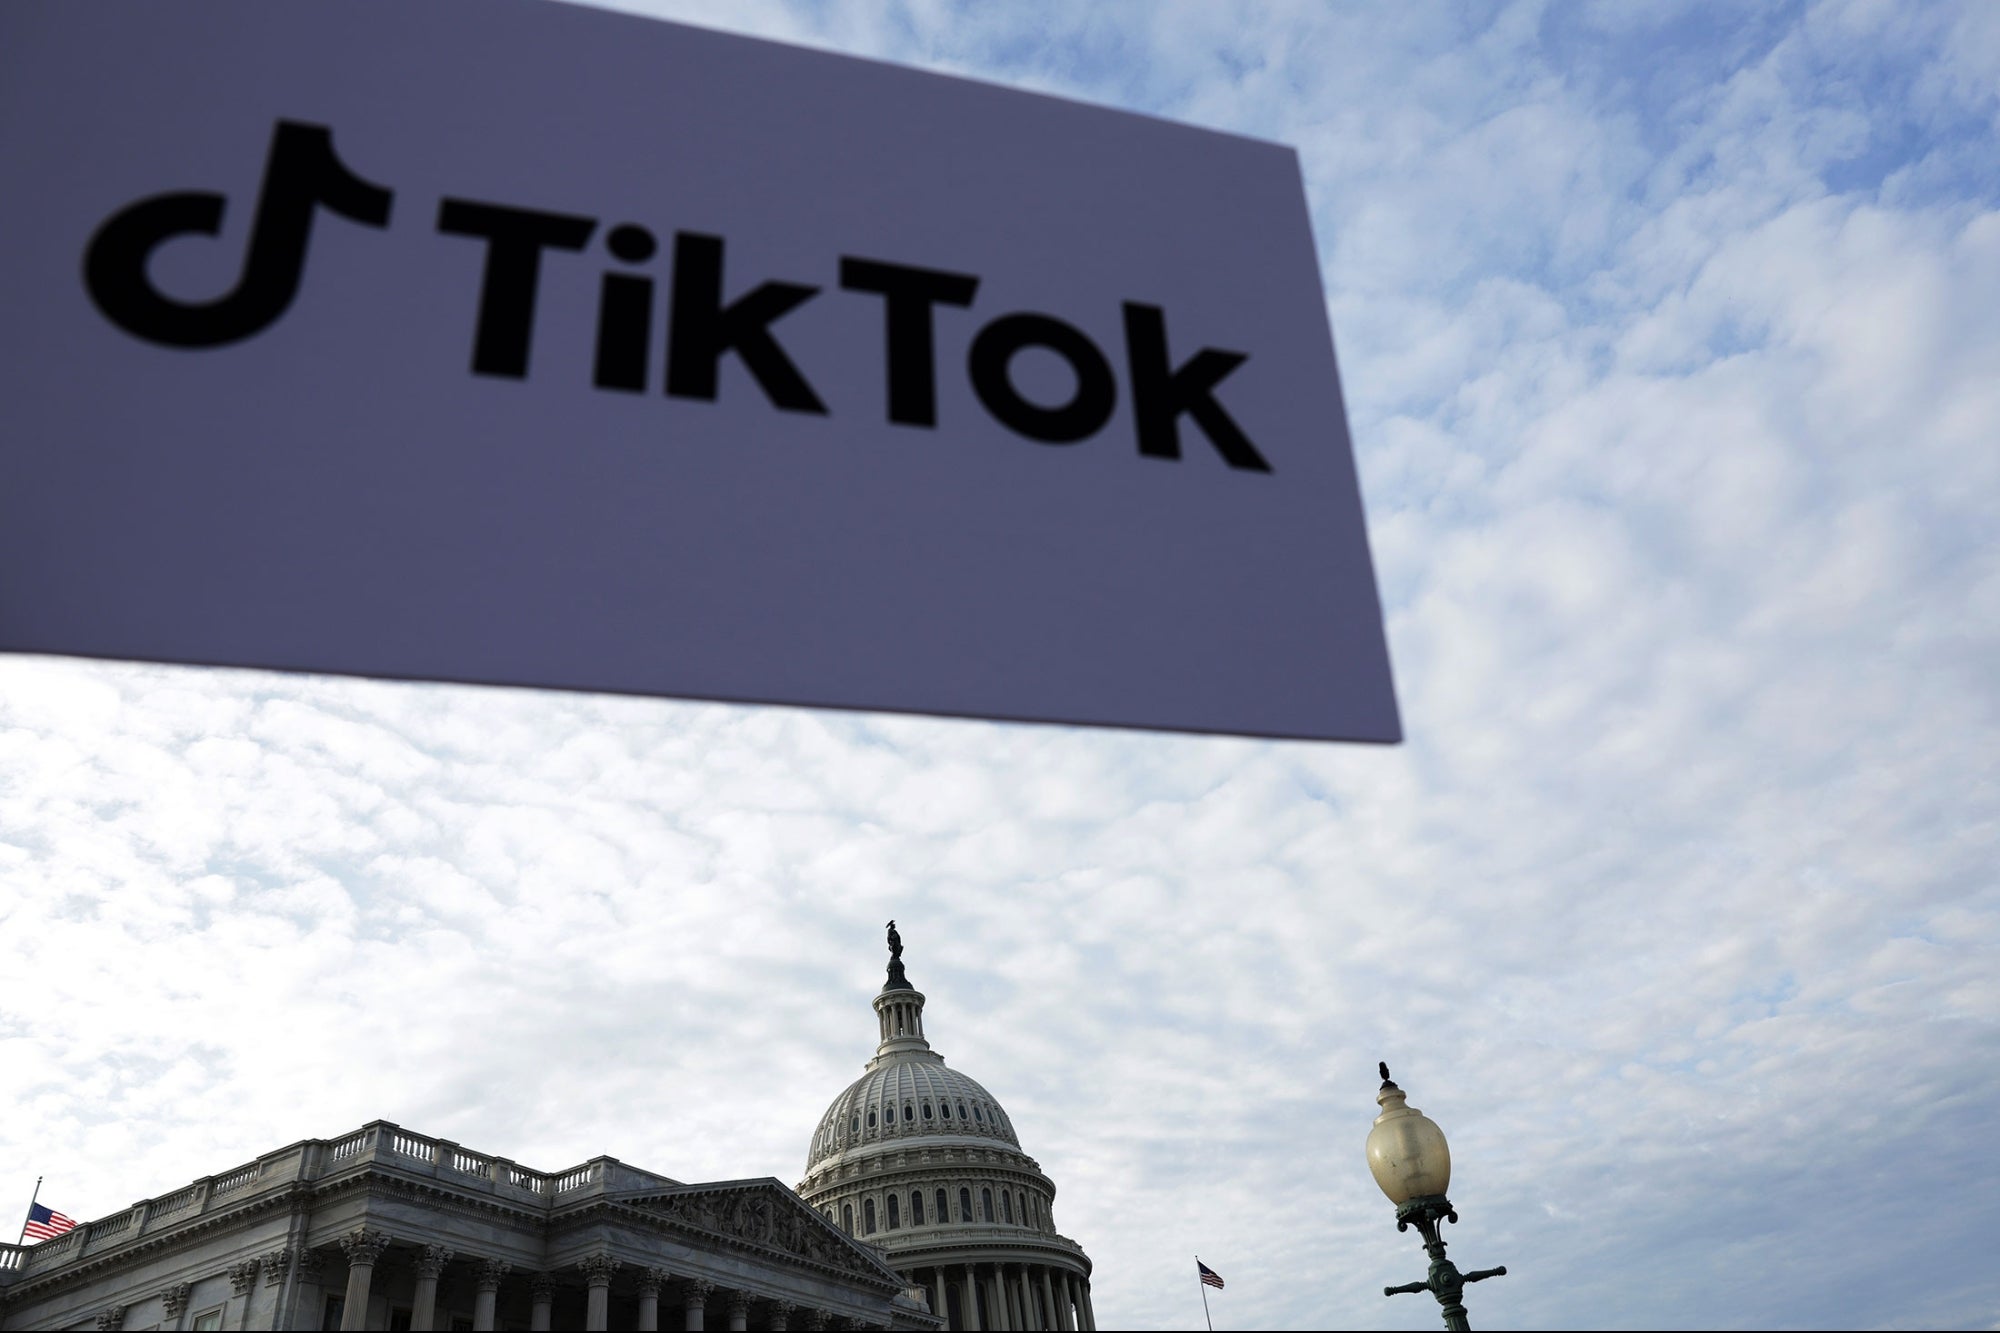 Banning TikTok Would Hurt Small Businesses. Here's What Congress Should Do Instead